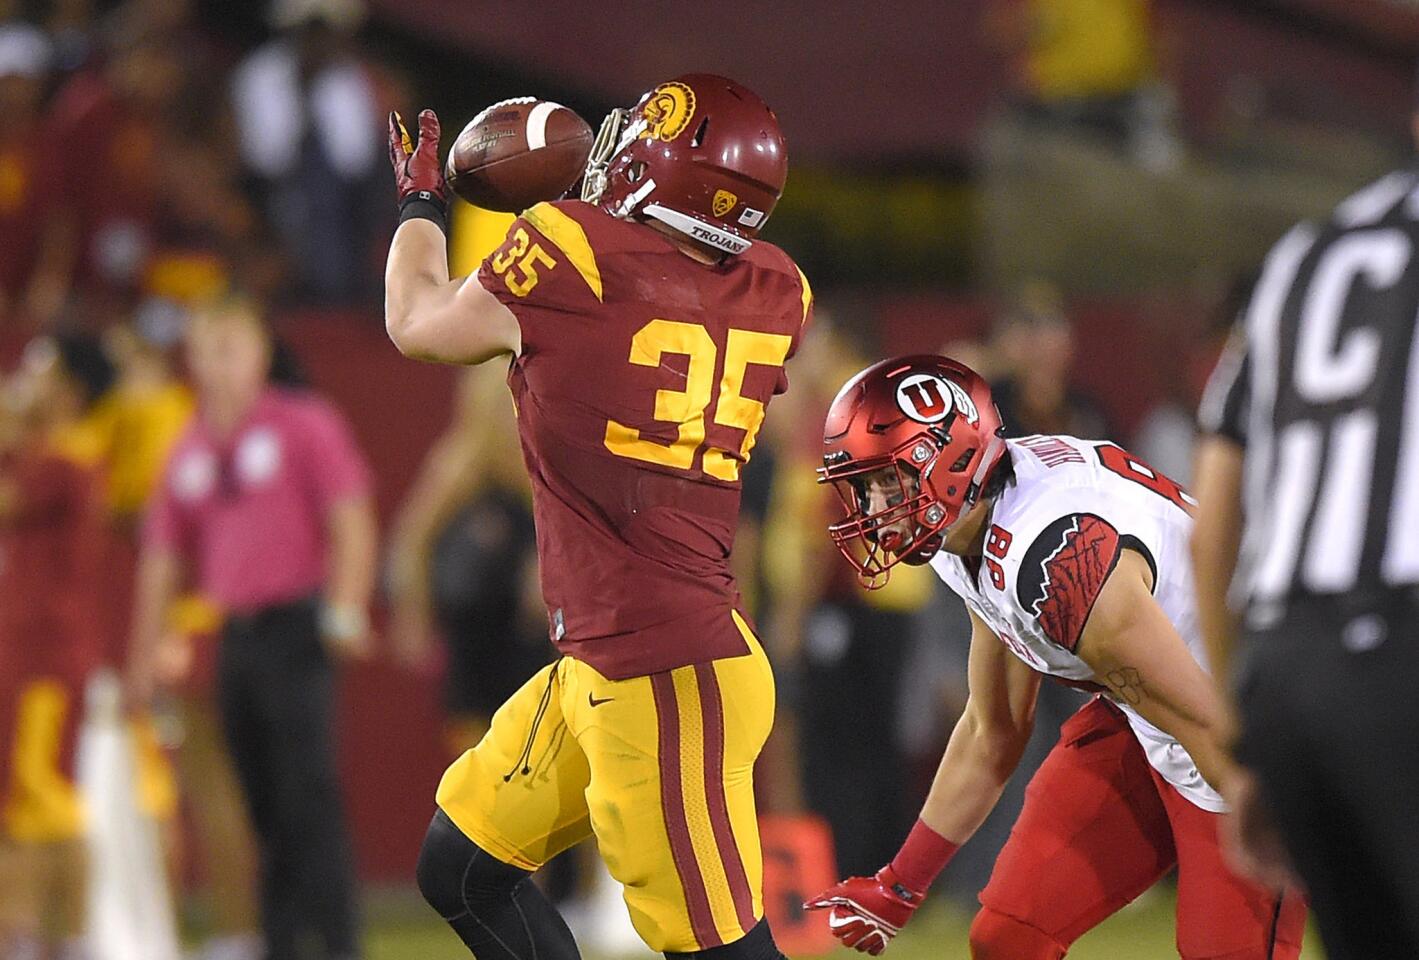 USC's Cameron Smith hopes fun times continue in homecoming against California